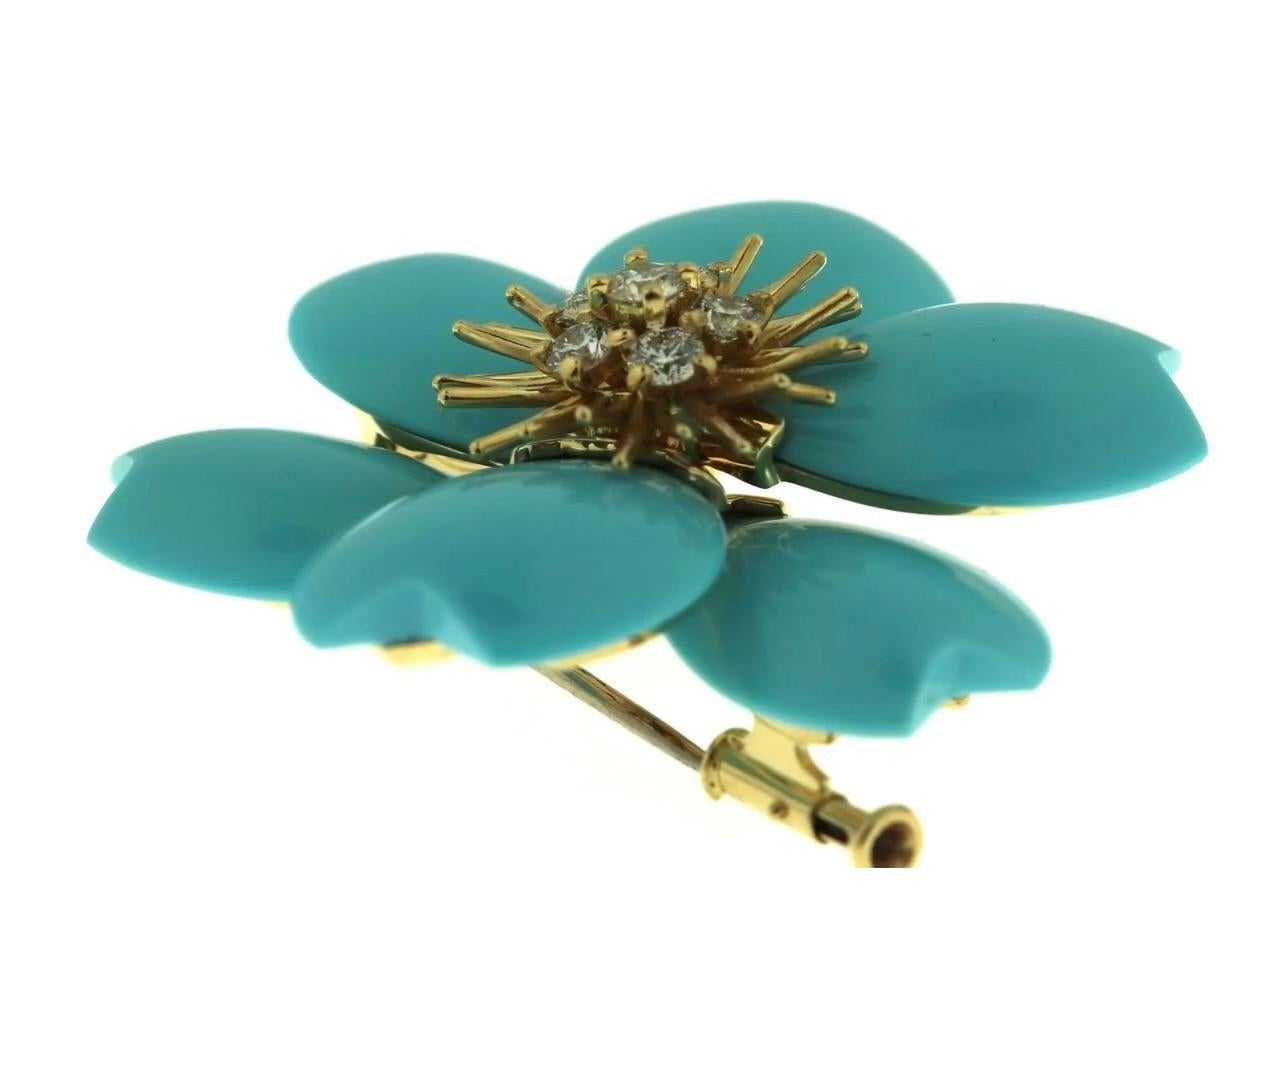 Beautiful and ultra rare Van Cleef & Arpels Rose De Noel yellow gold diamonds and turquoise brooch . This incredible piece is a symbol of beauty and romance . It can be worn as a brooch or as a pendant with your own chain . This item is unworn and